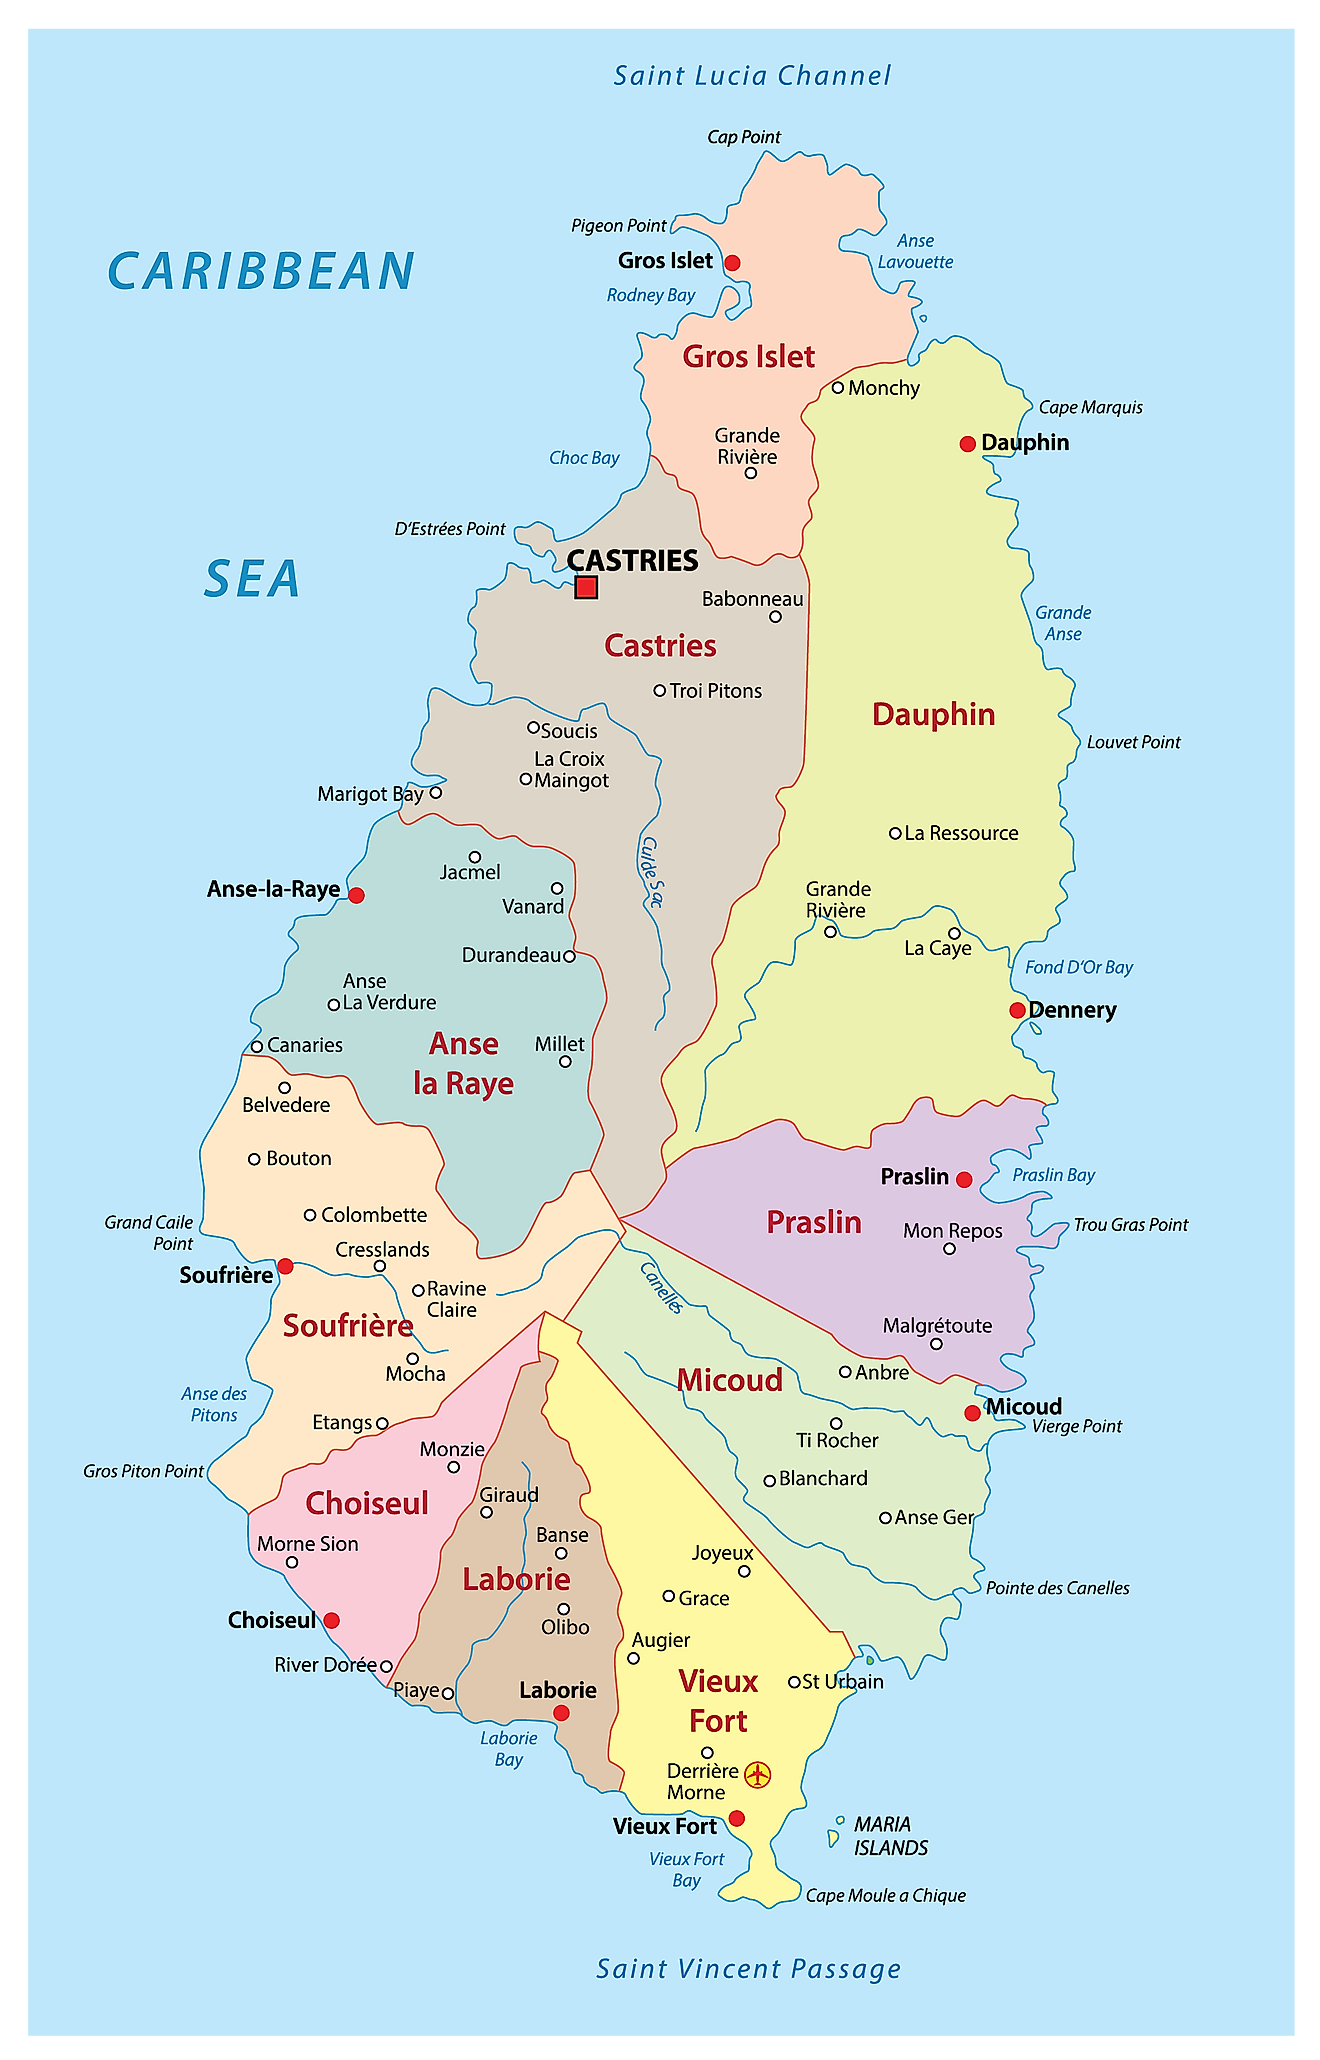 Large Map Of St Lucia Saint Lucia Maps & Facts - World Atlas